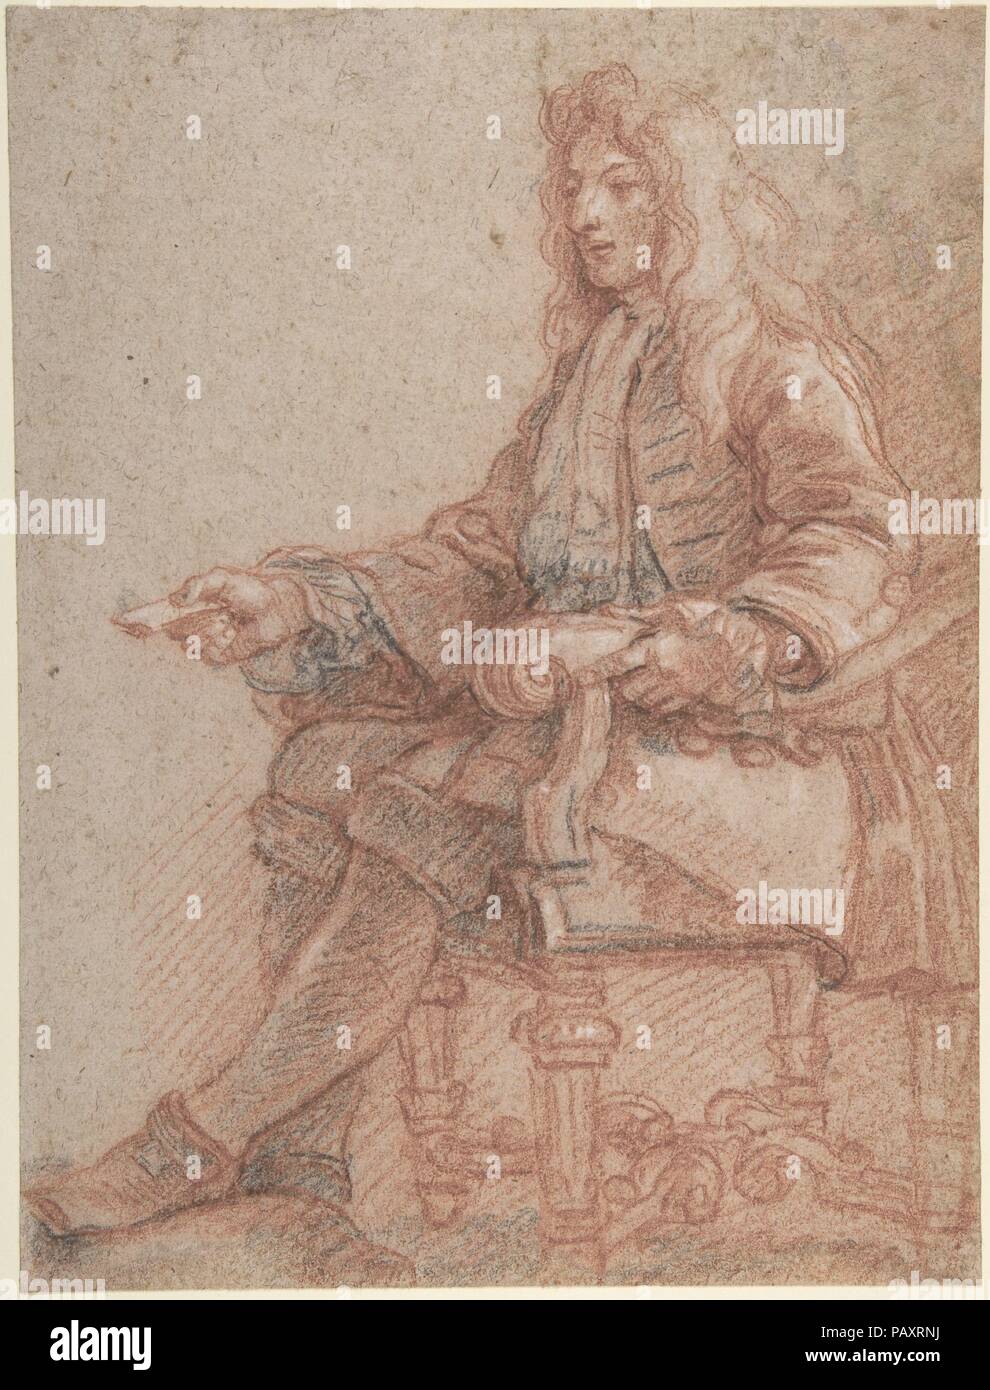 Gentleman Seated in an Armchair. Artist: Charles de la Fosse (French, Paris 1636-1716 Paris). Dimensions: 12 1/16 x 9 1/8 in.  (30.7 x 23.2 cm). Date: late 17th century-early 18th century.  After a trip to Italy from 1659 to 1664, to which he certainly owed his taste for color, La Fosse entered Le Brun's studio some time after 1665. He worked under his direction at the Château des Tuileries and then contributed to the decoration of the grands appartements at Versailles. La Fosse also created décors for private mansions and parisian churches.  Lively in its execution, this drawing cannot be con Stock Photo